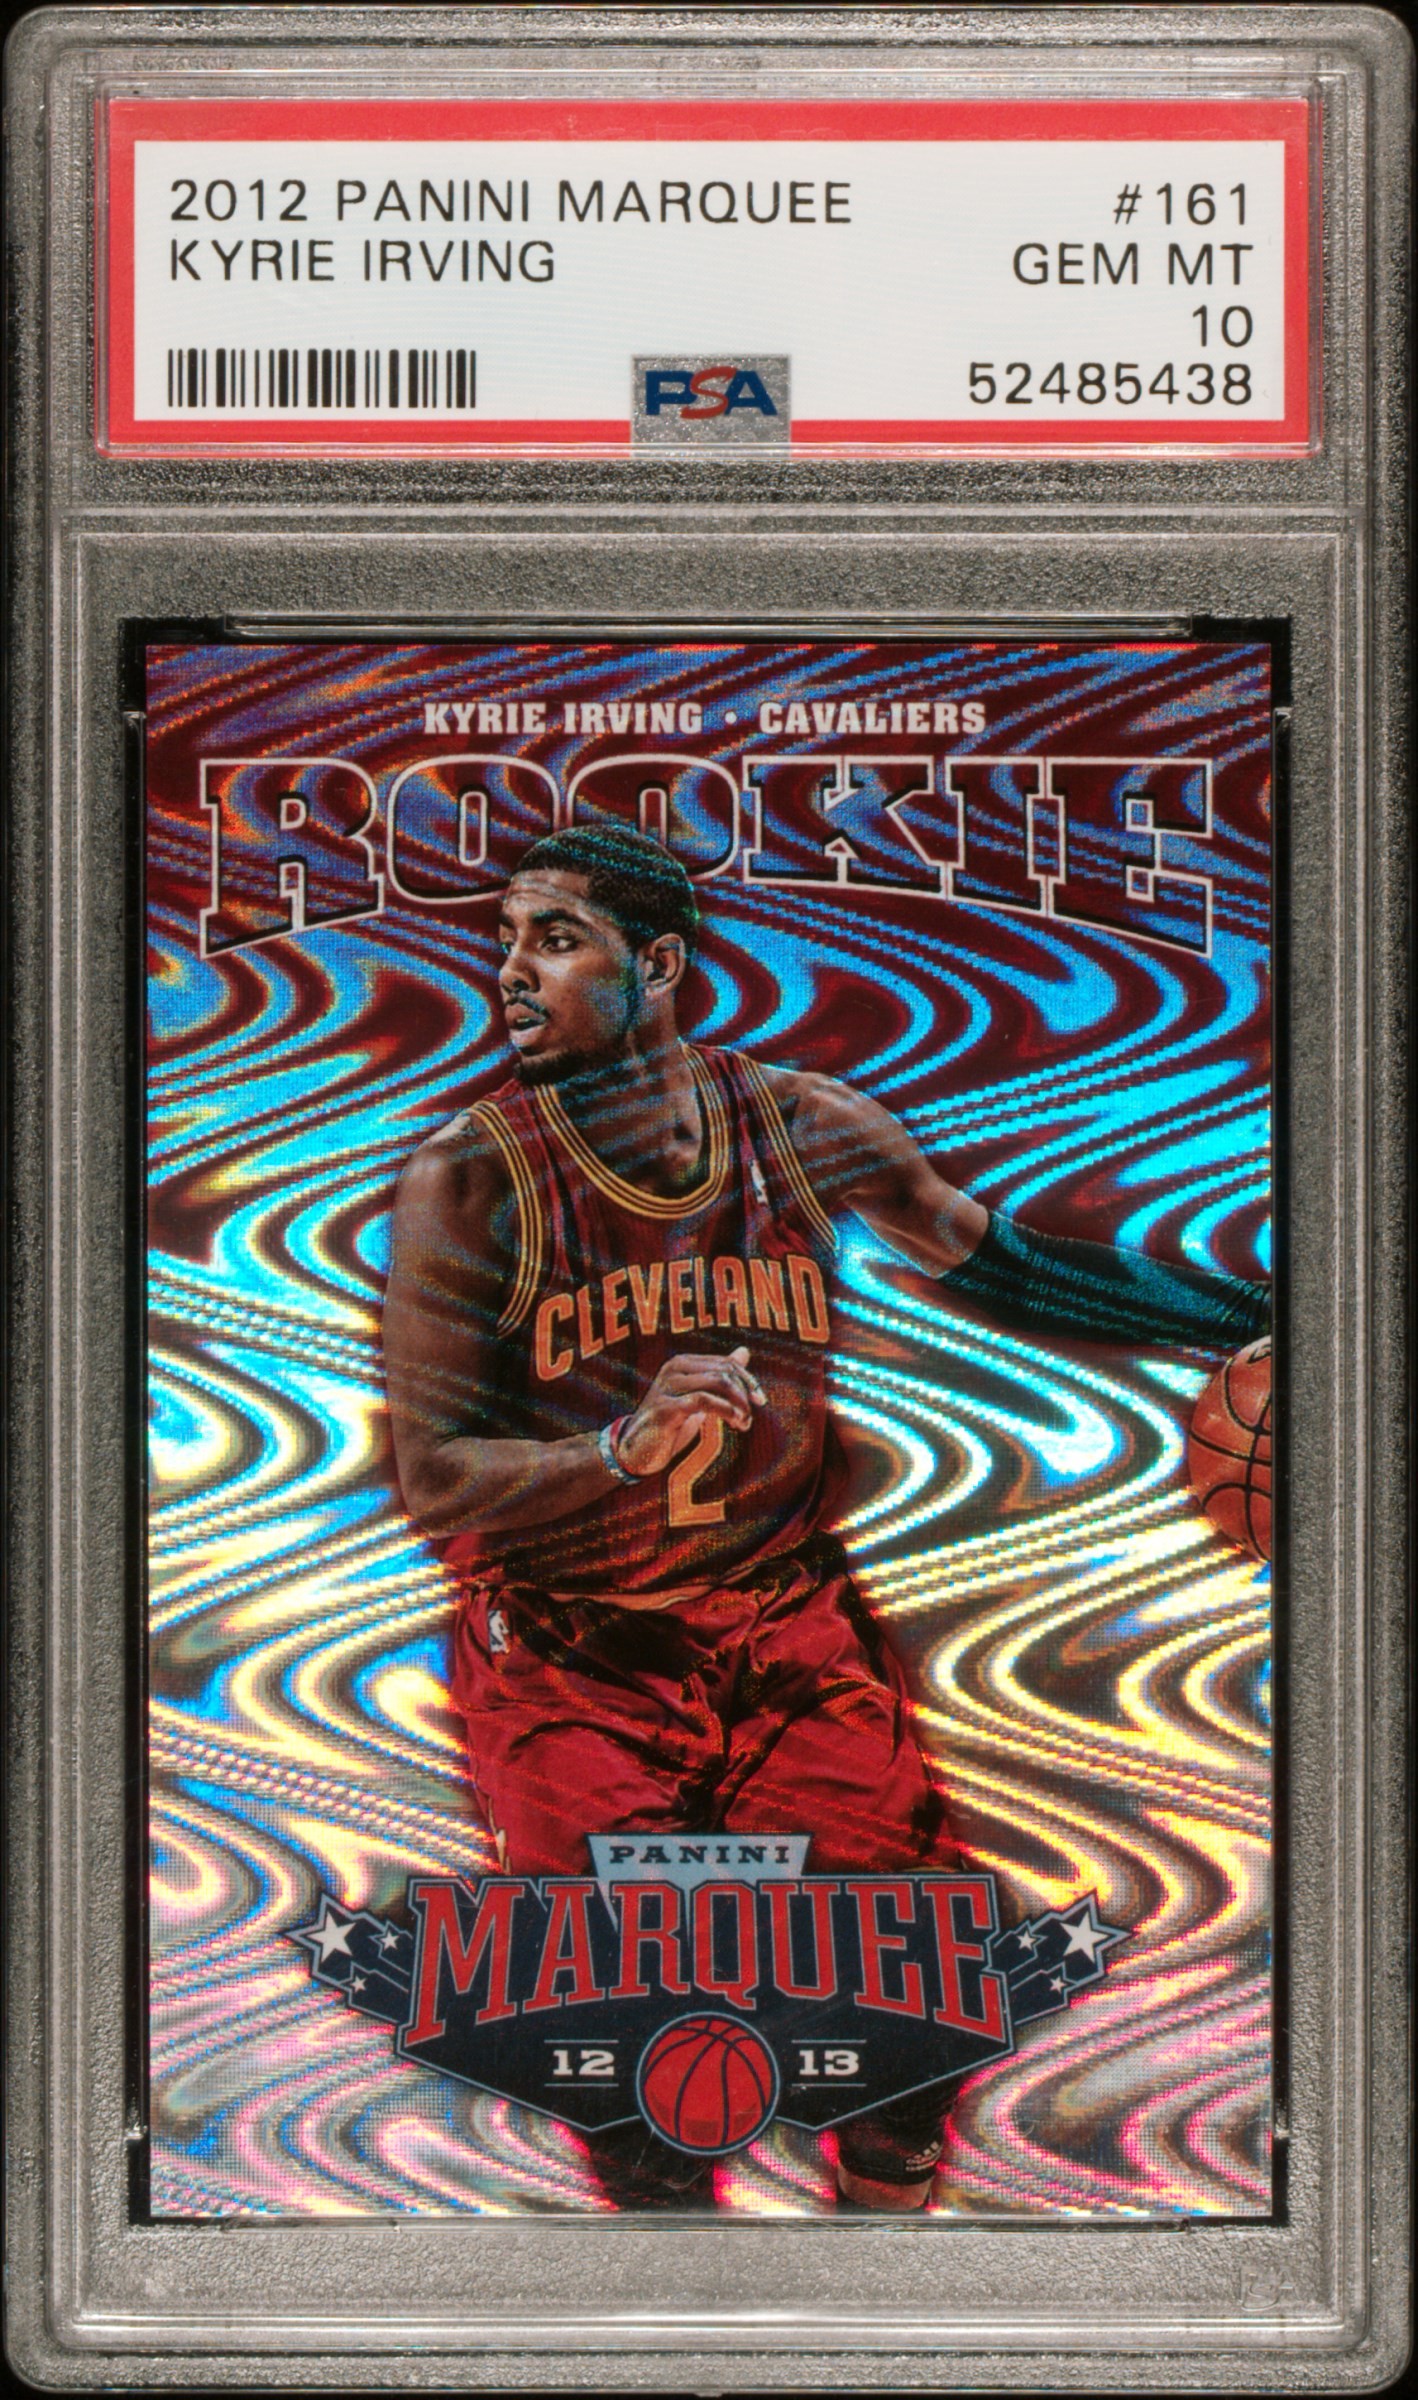 2012 Panini Marquee 161 Kyrie Irving Rookie Card – PSA GEM MT 10